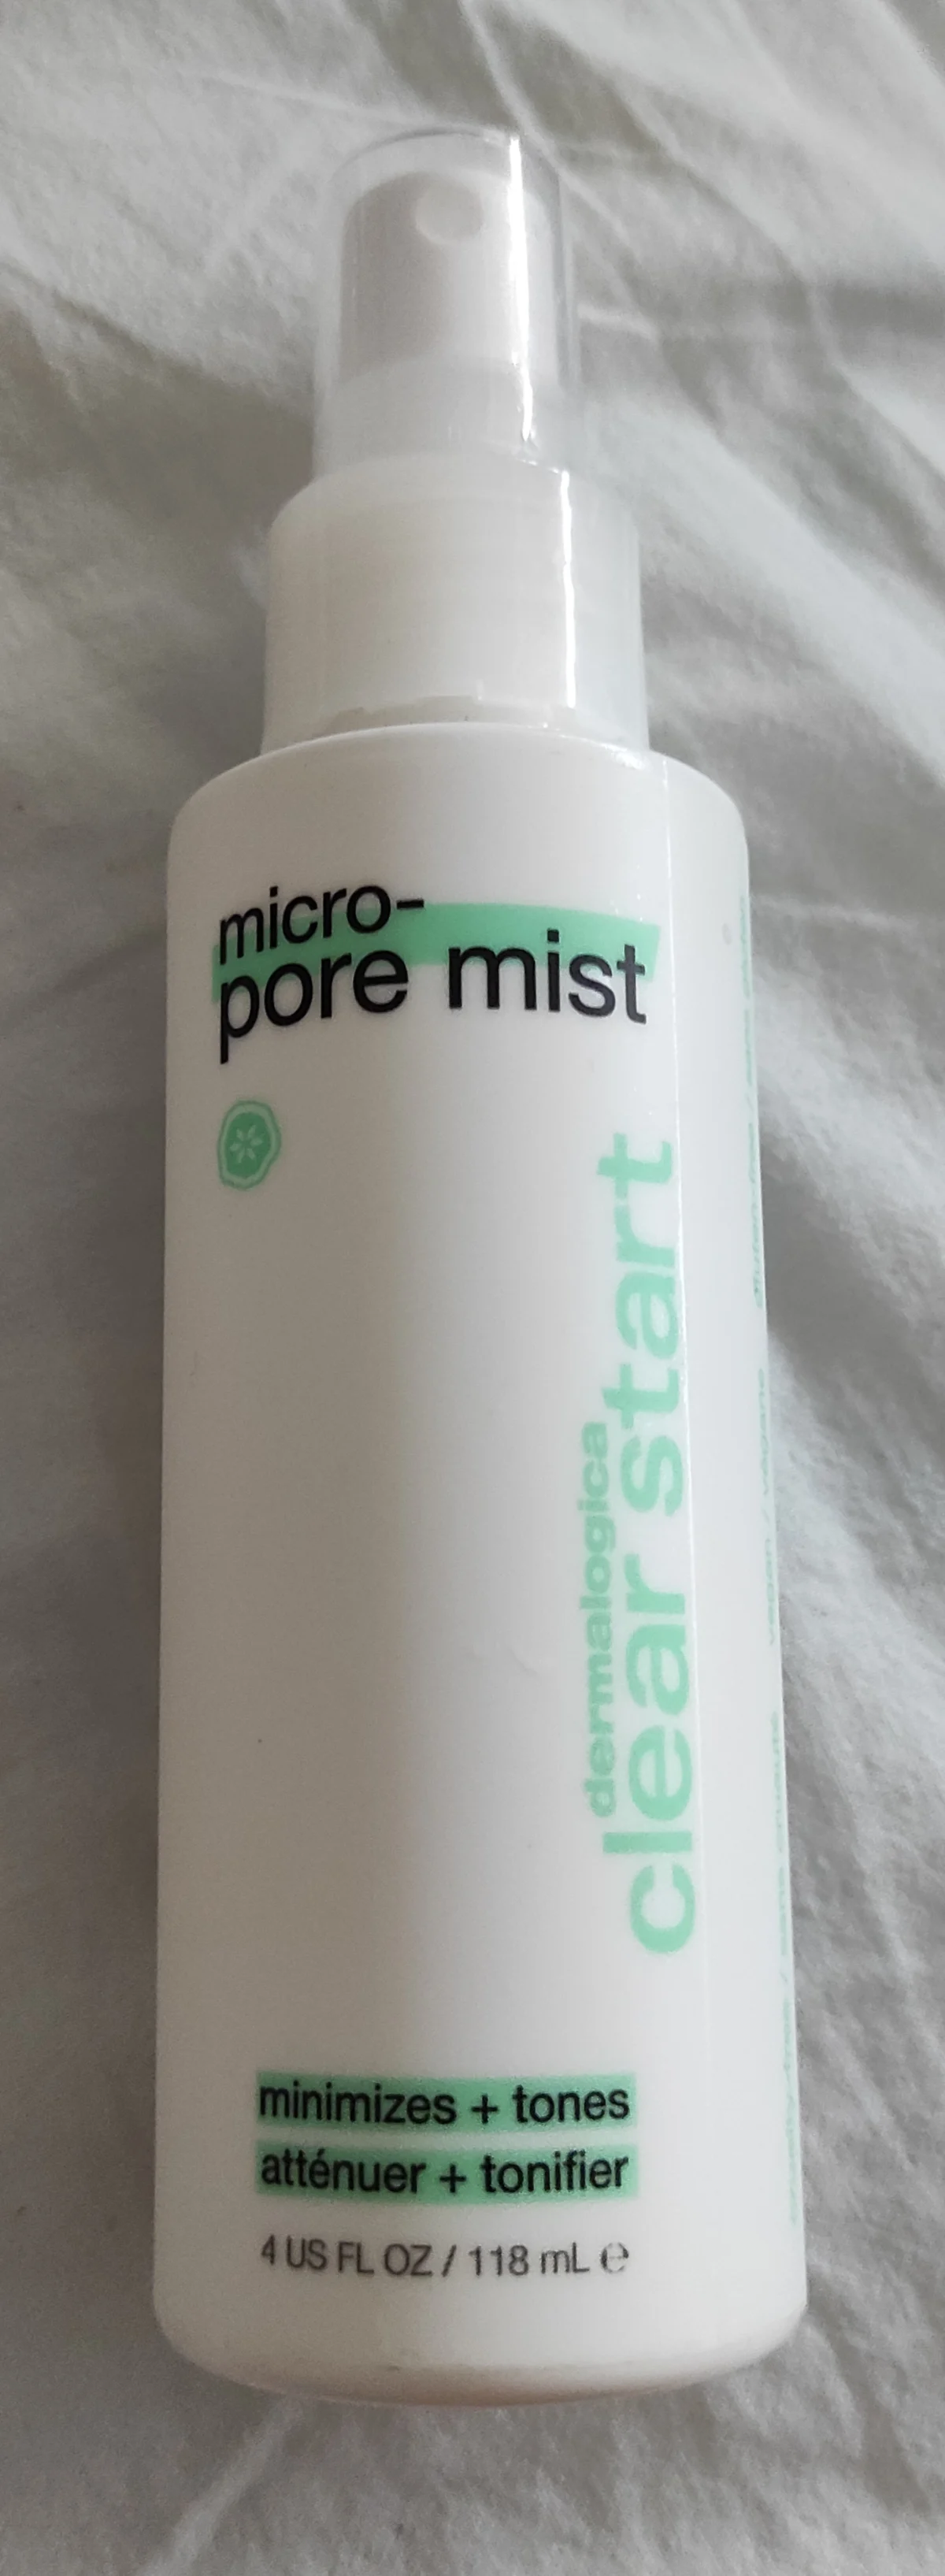 Dermalogica Clear Start Micro-Pore Mist - review image